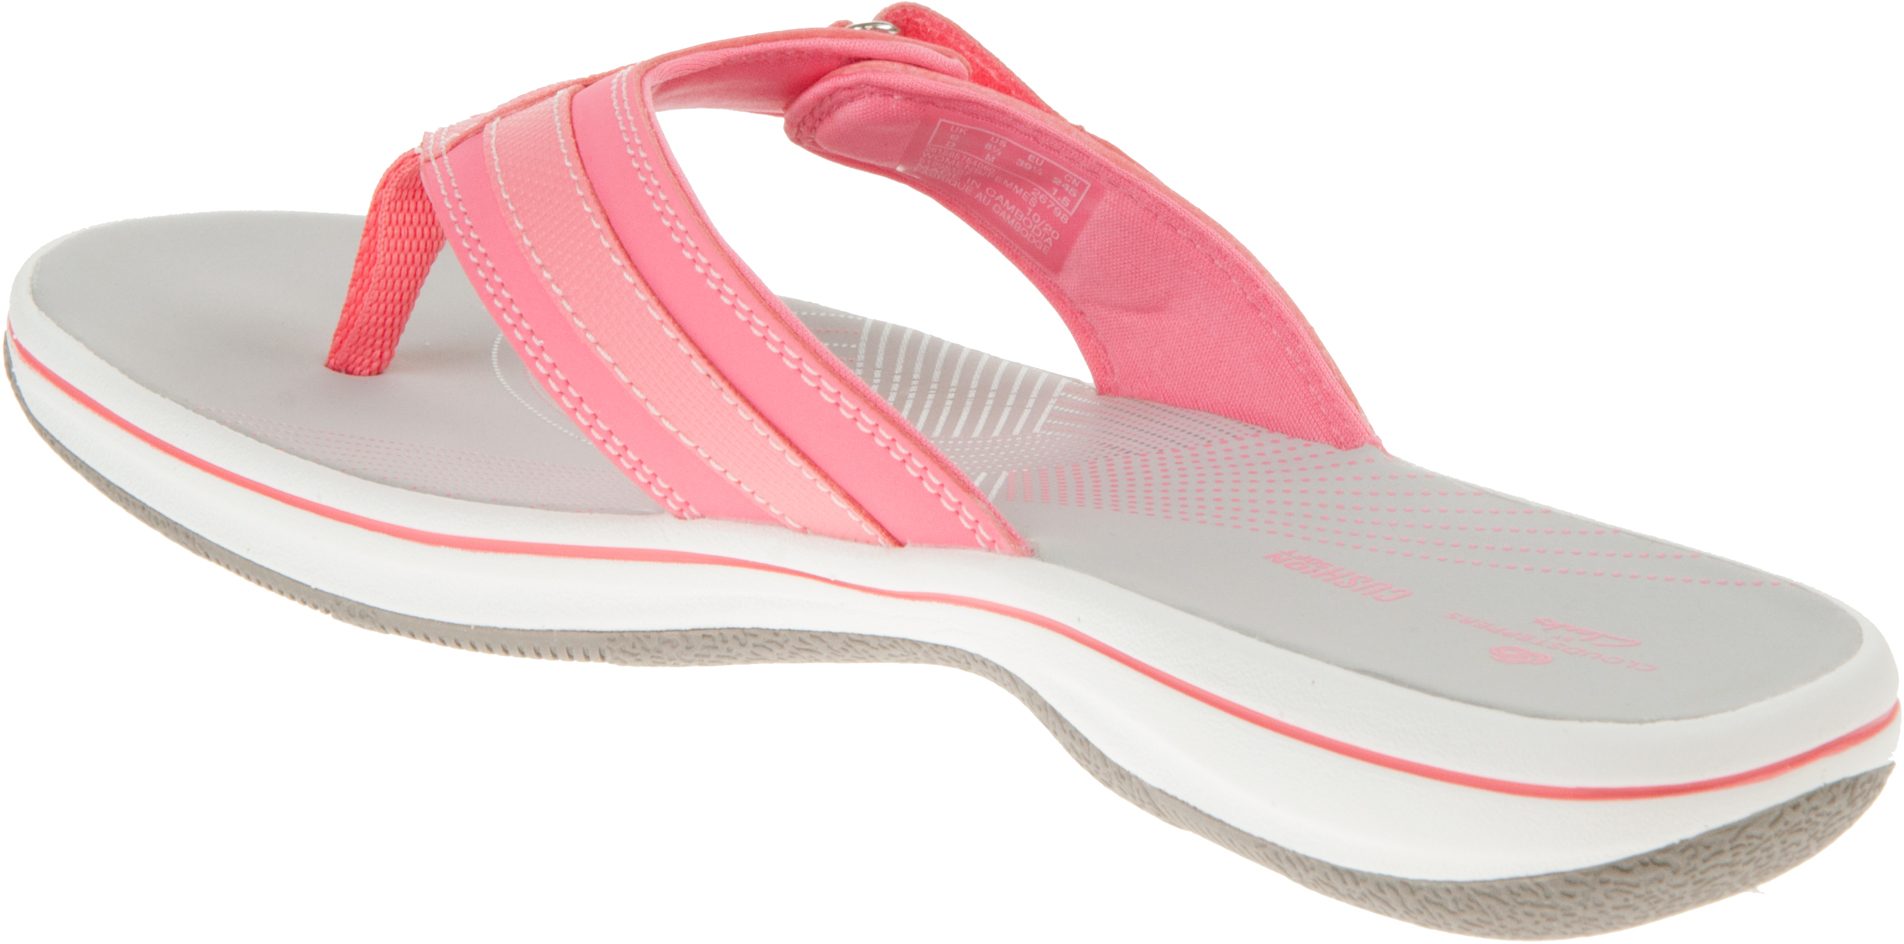 Clarks Brinkley Sea Bright Pink Synthetic 26158575 - Toe Post Sandals ...